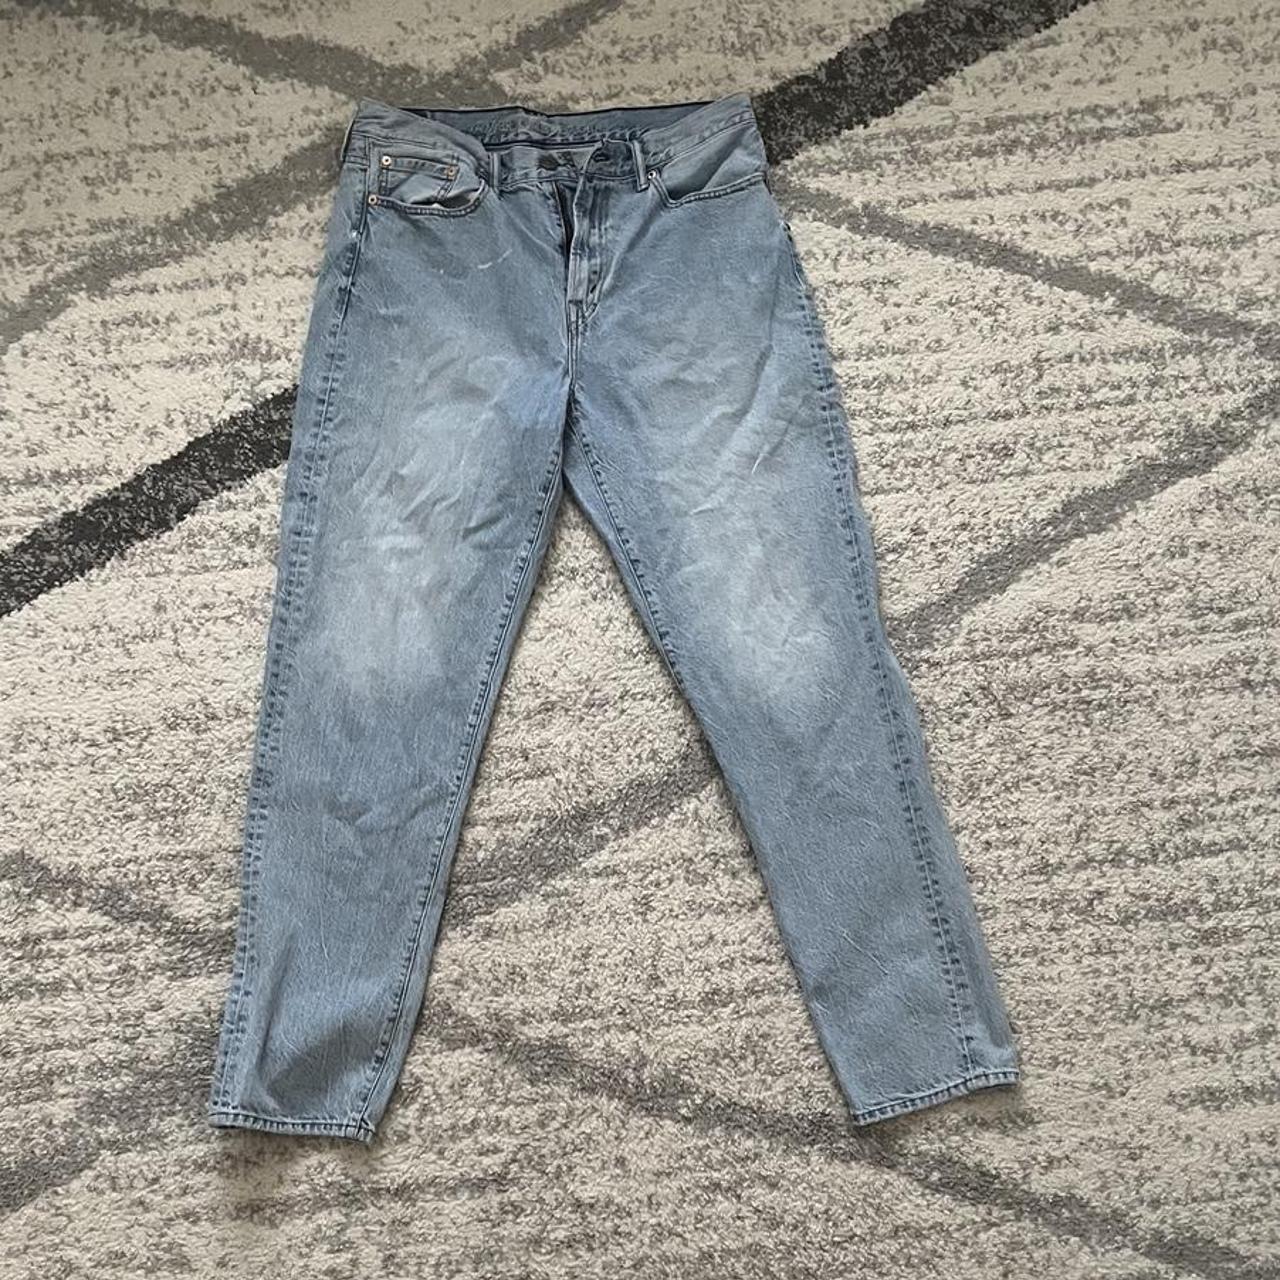 American Eagle men’s light wash relaxed fit jeans - Depop